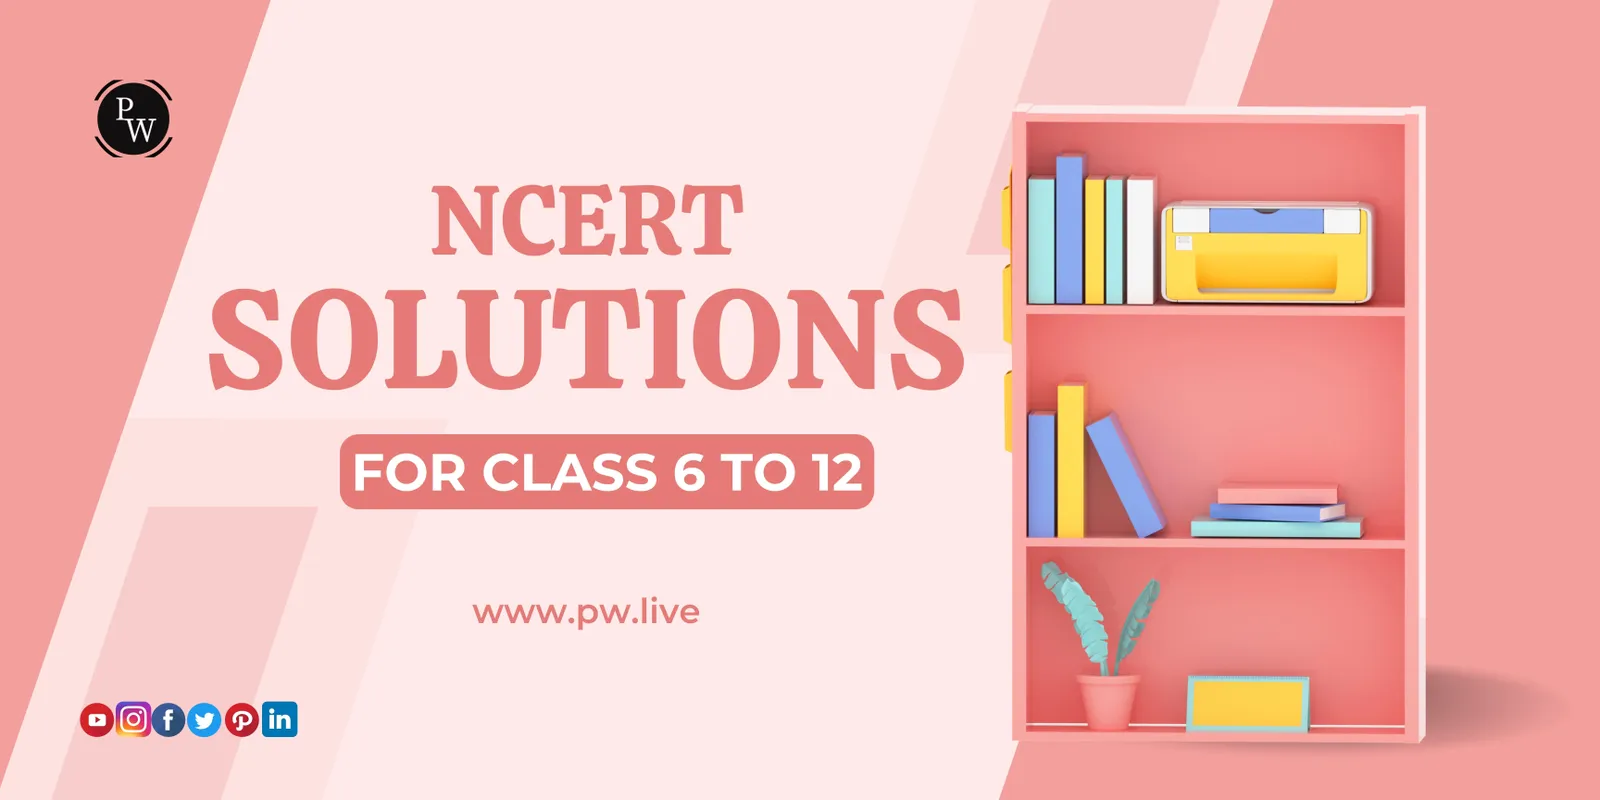 Chapter-wise NCERT Solutions For Classes 6 to 12 | PW 